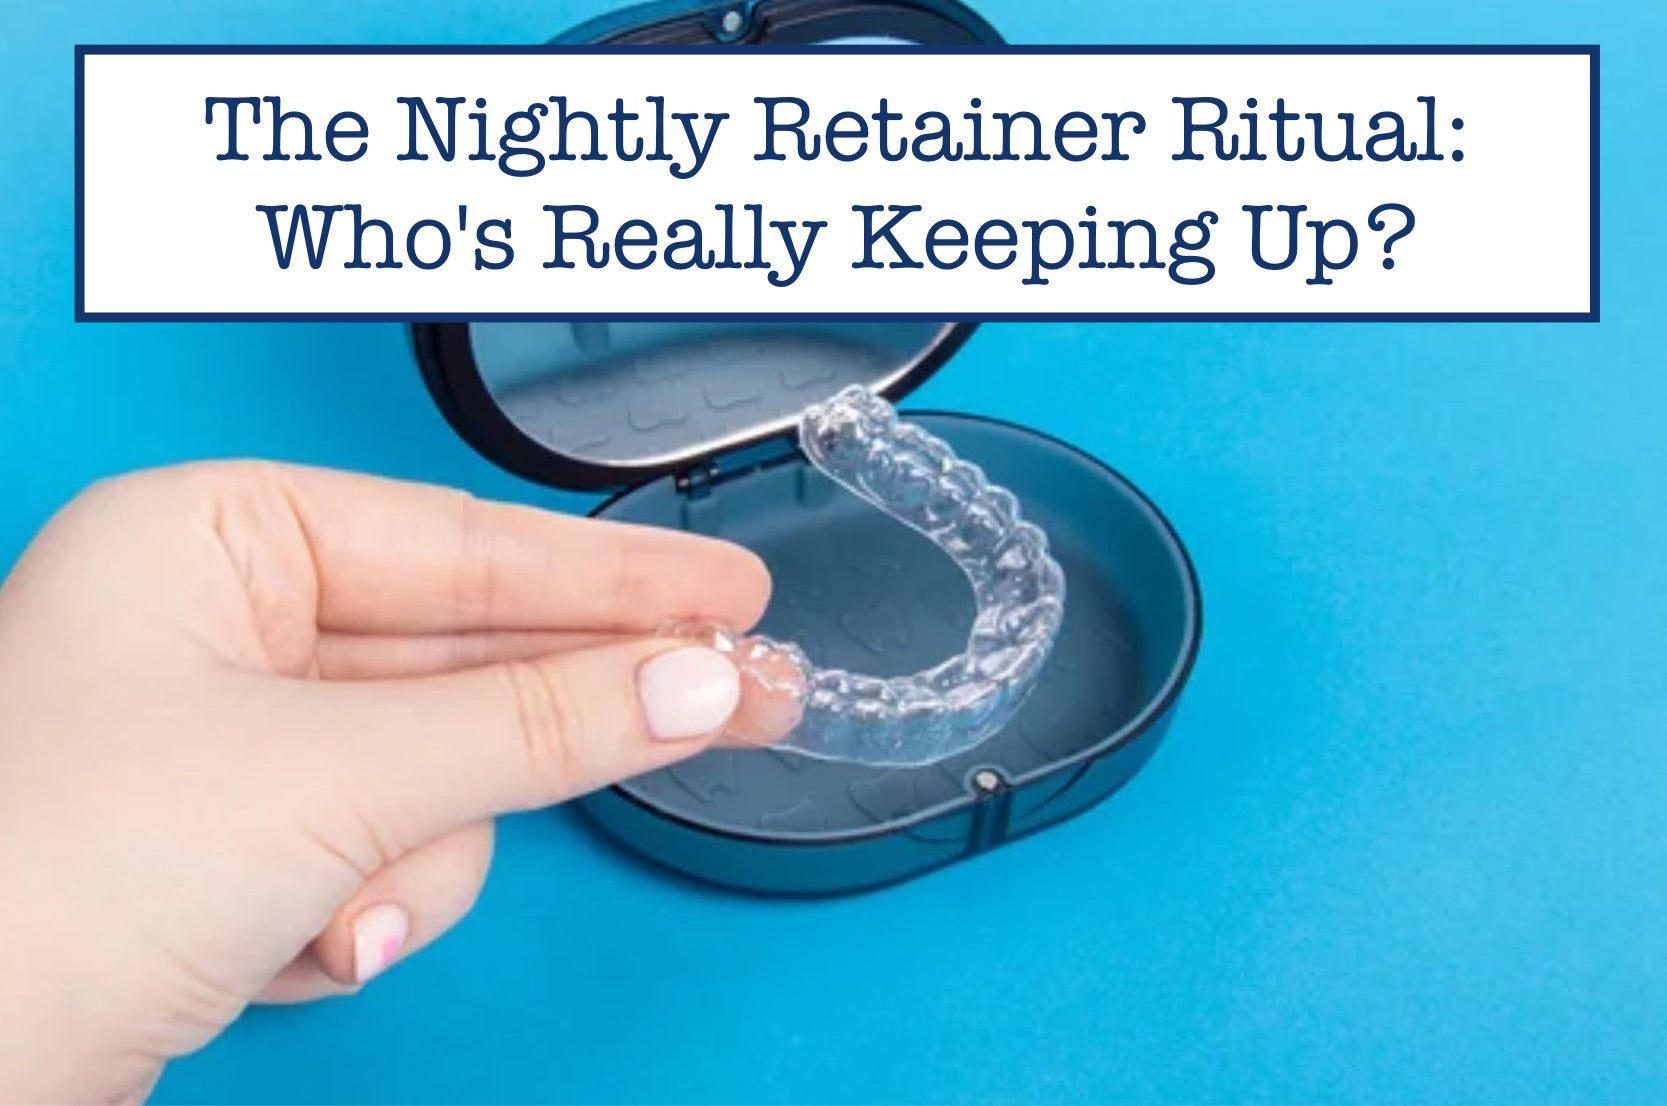 The Nightly Retainer Ritual: Who's Really Keeping Up?